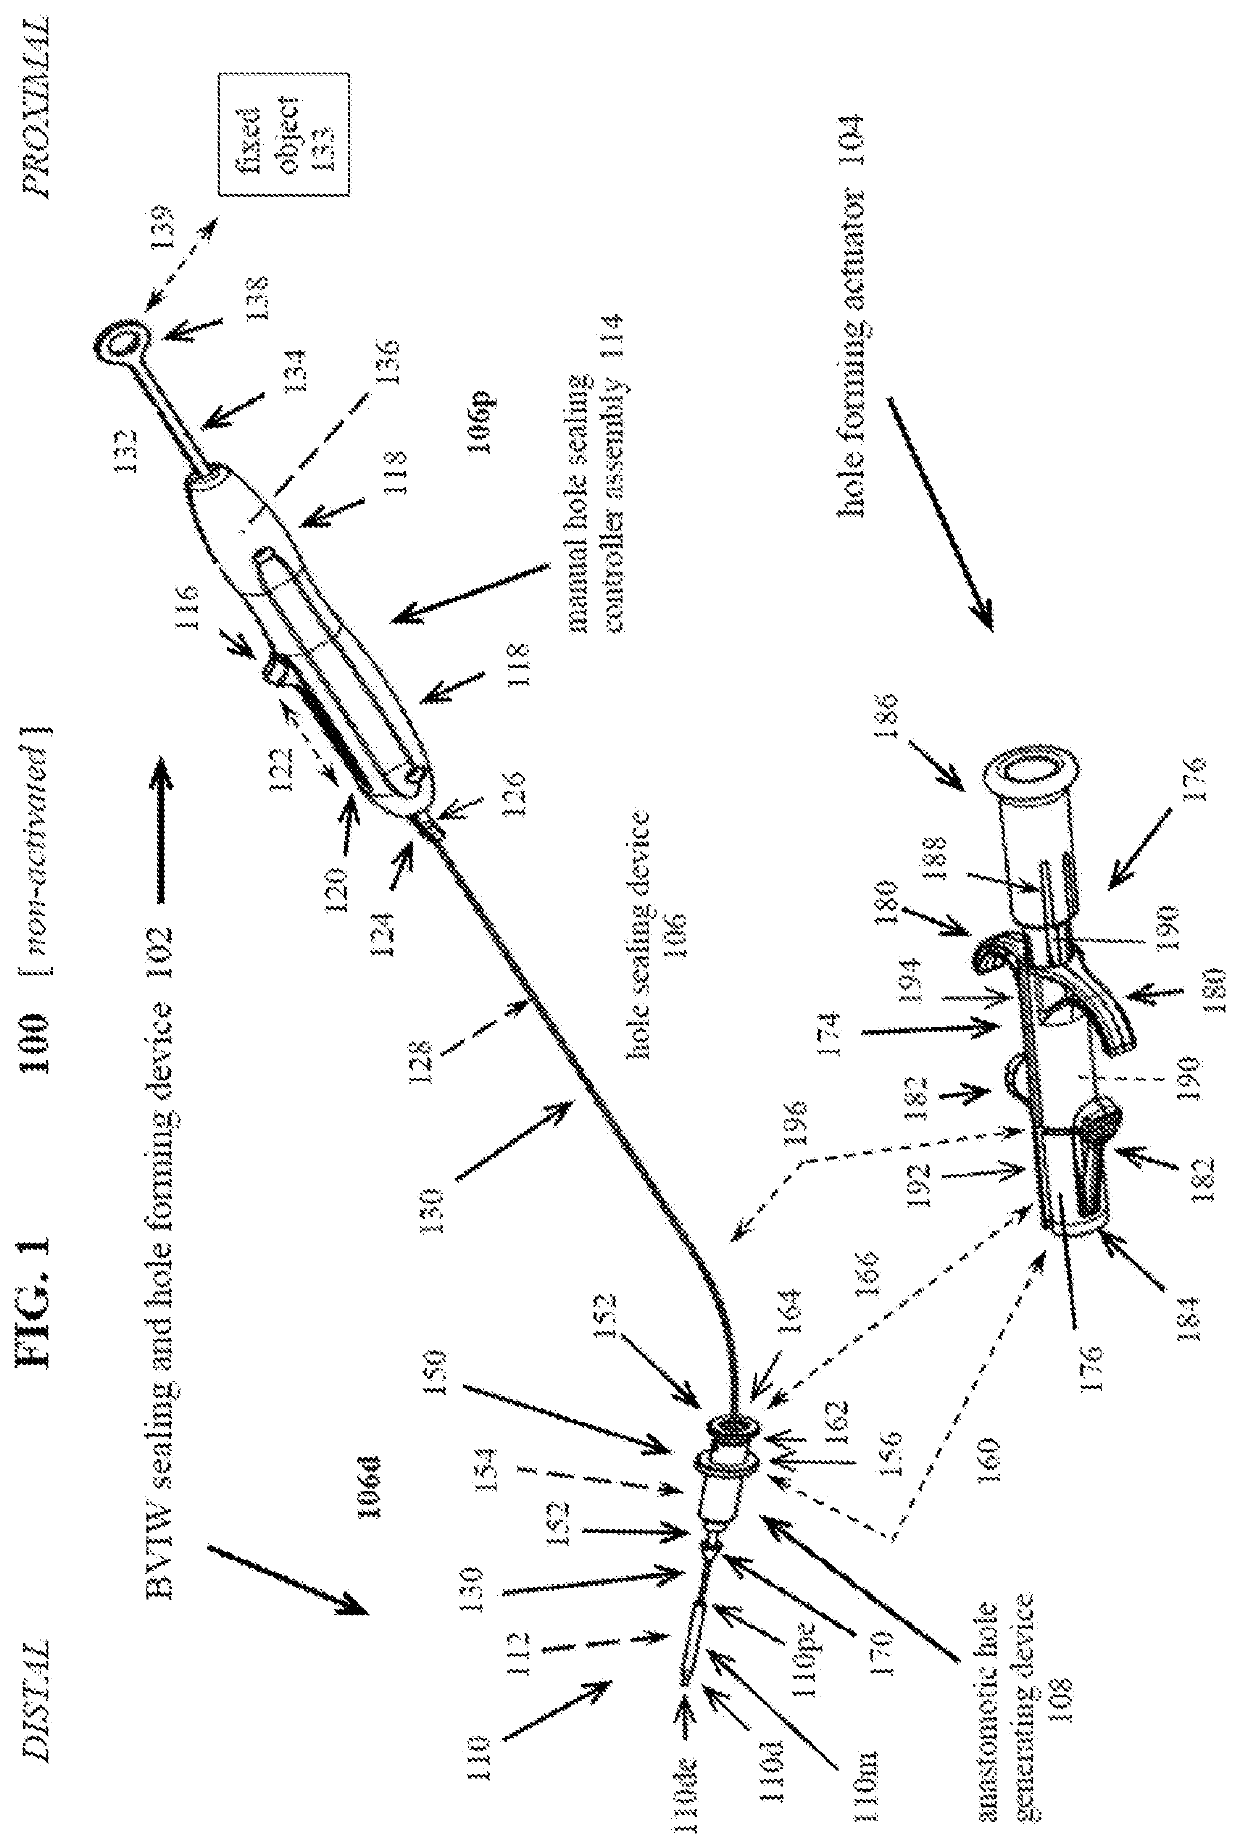 Apparatuses and methods for use in surgical vascular anastomotic procedures